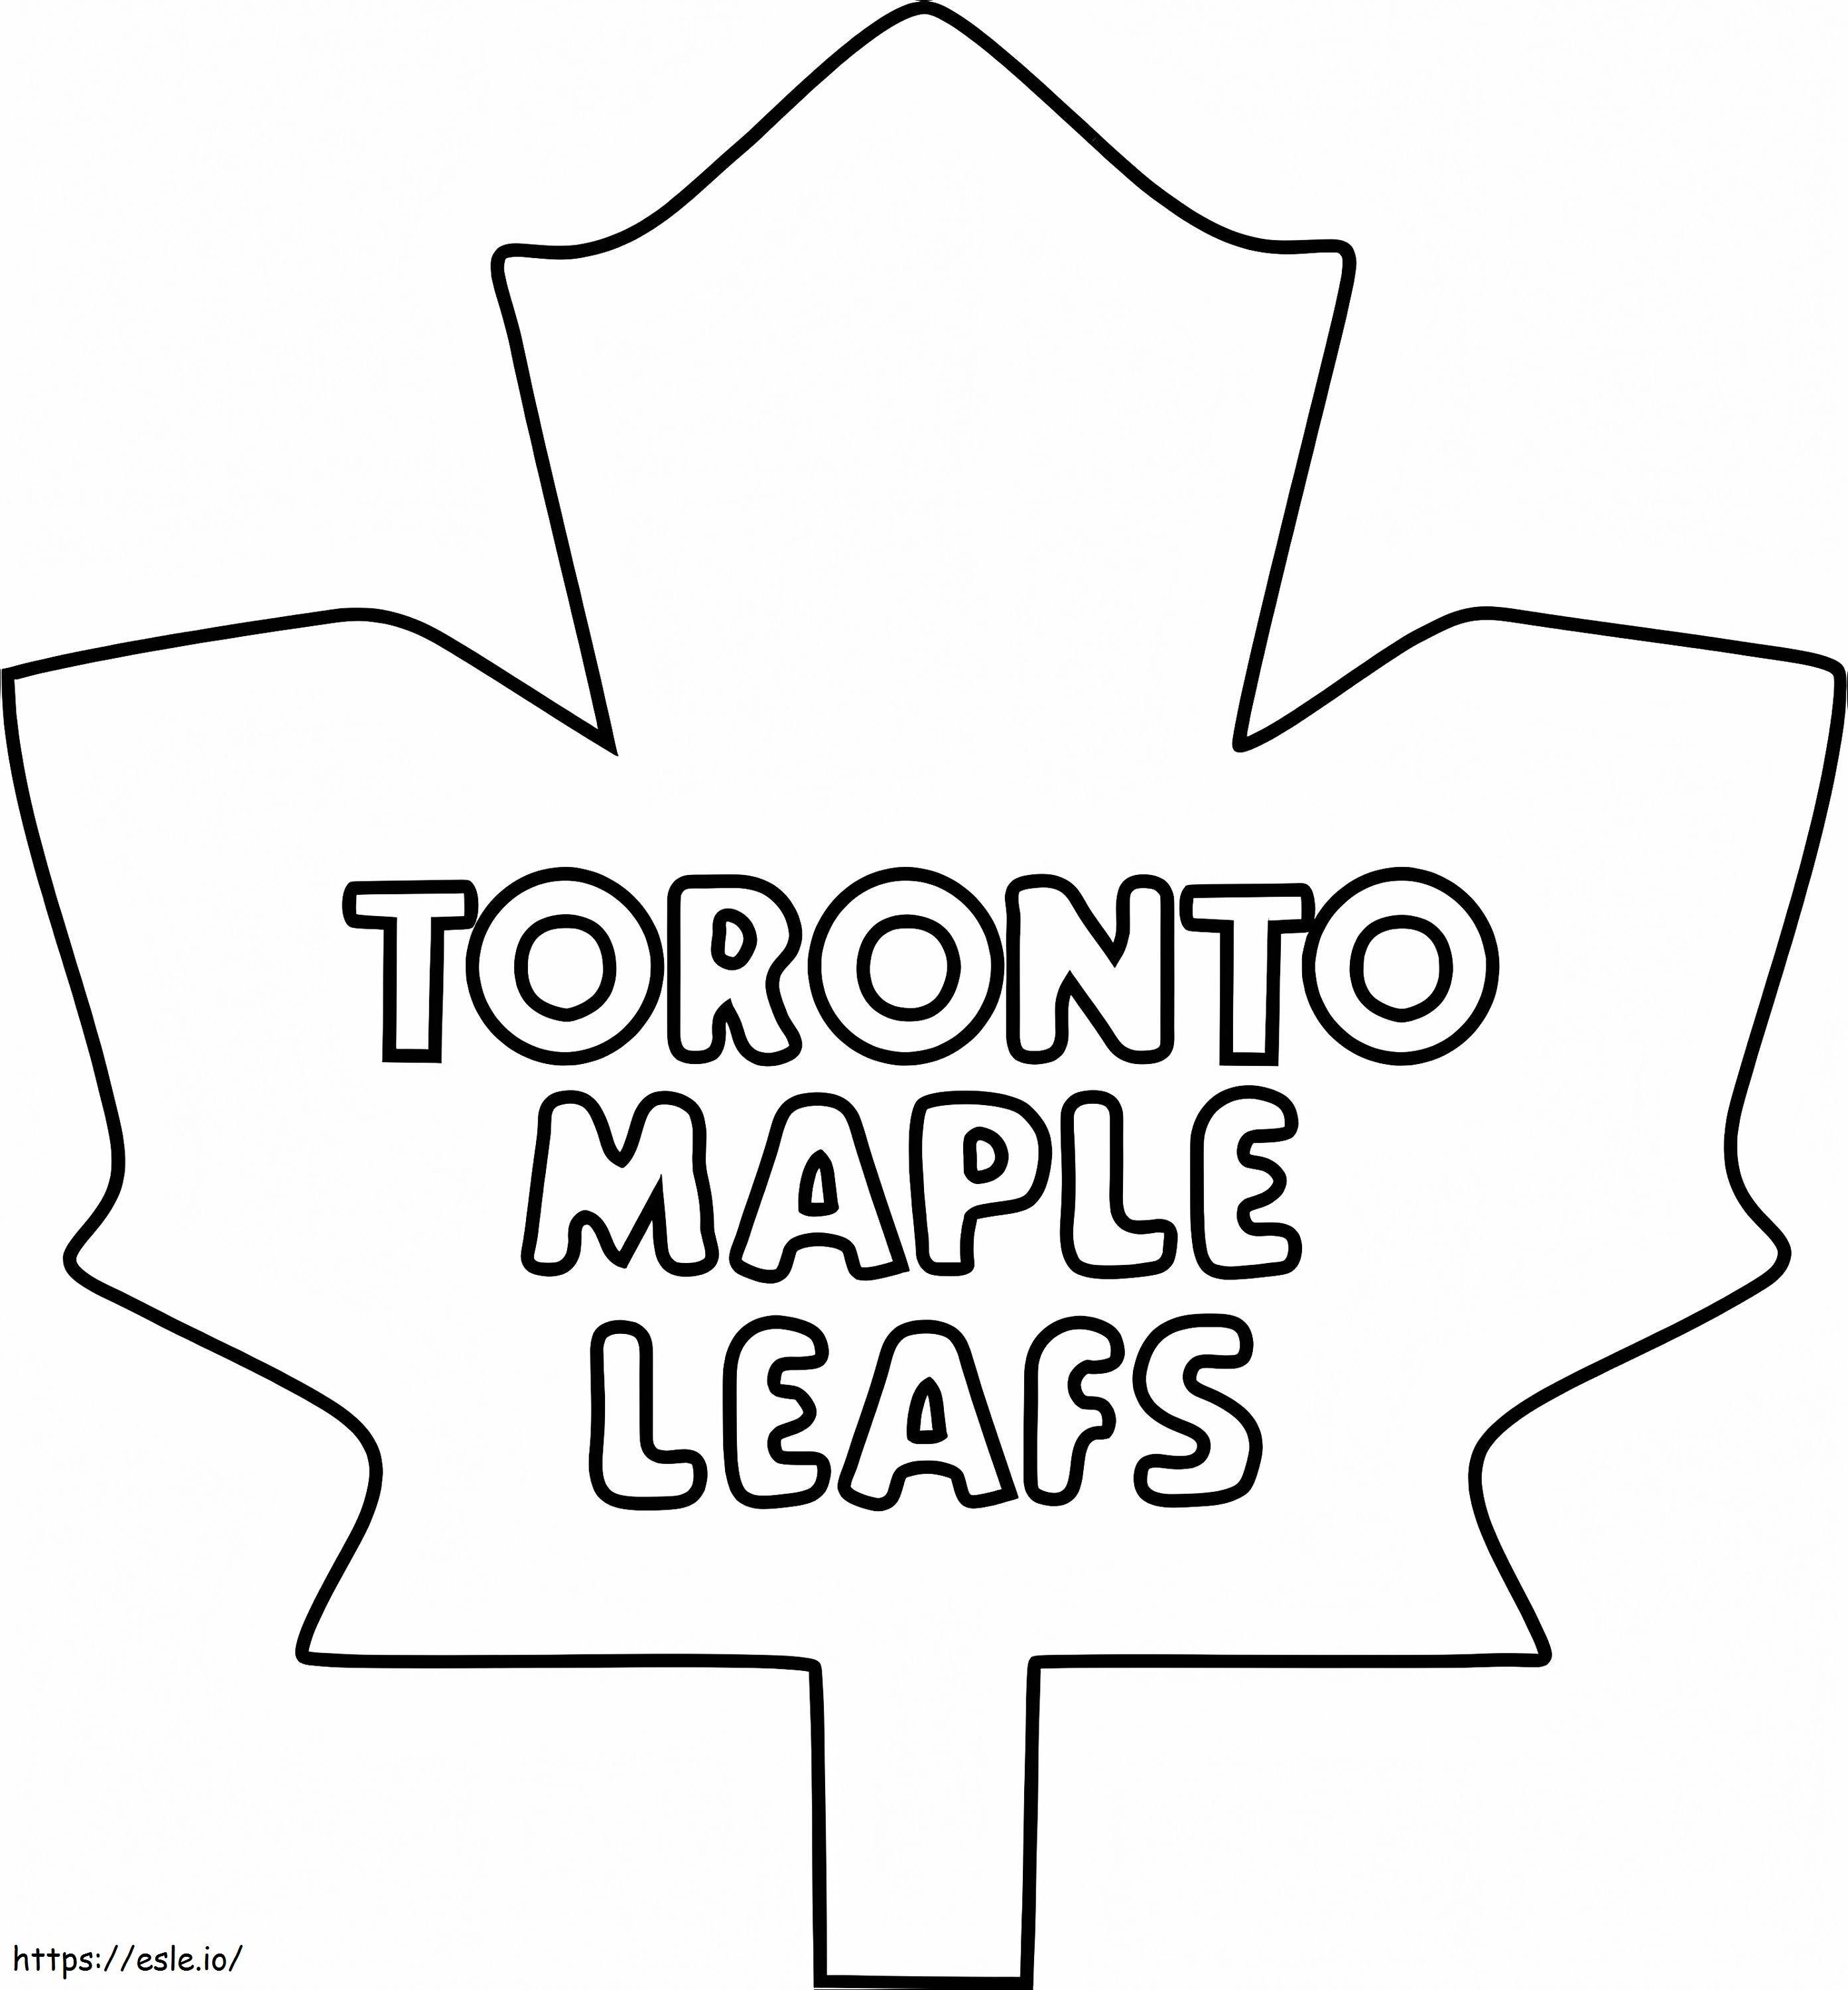 Toronto Maple Leafs Logo coloring page